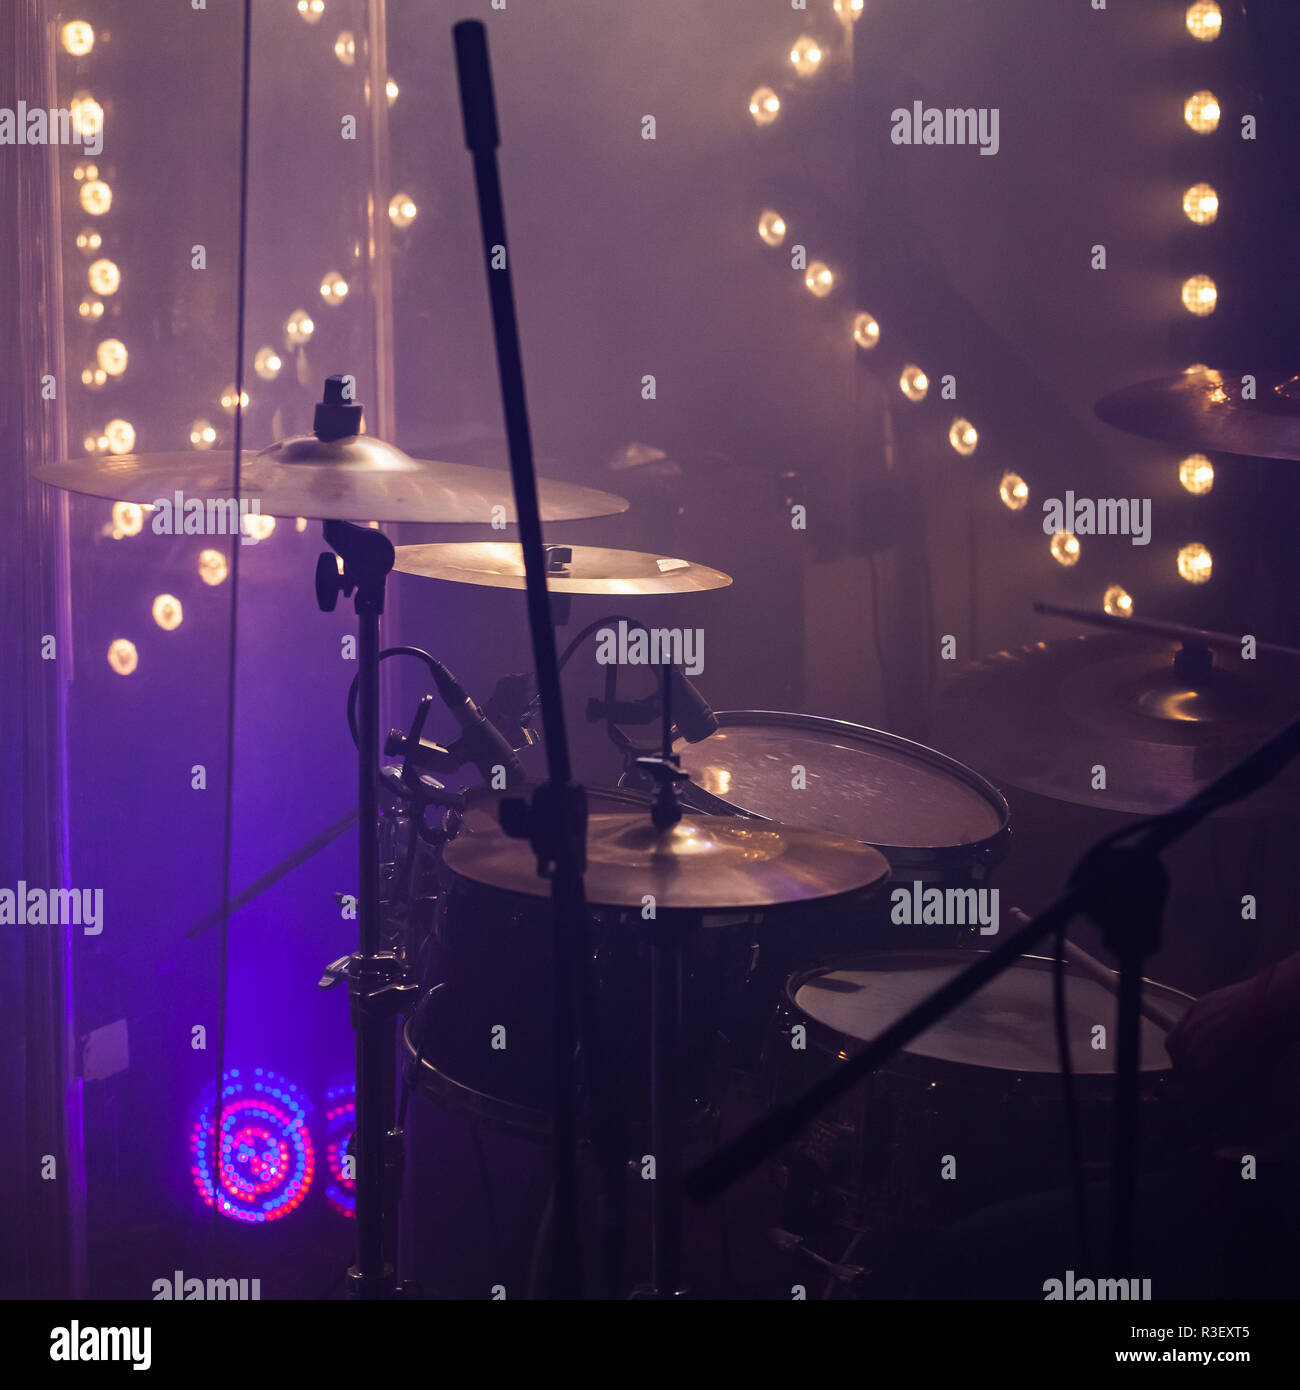 Live rock music photo background, rock drum set  with cymbals in stage lights. Close-up square photo, soft selective focus Stock Photo